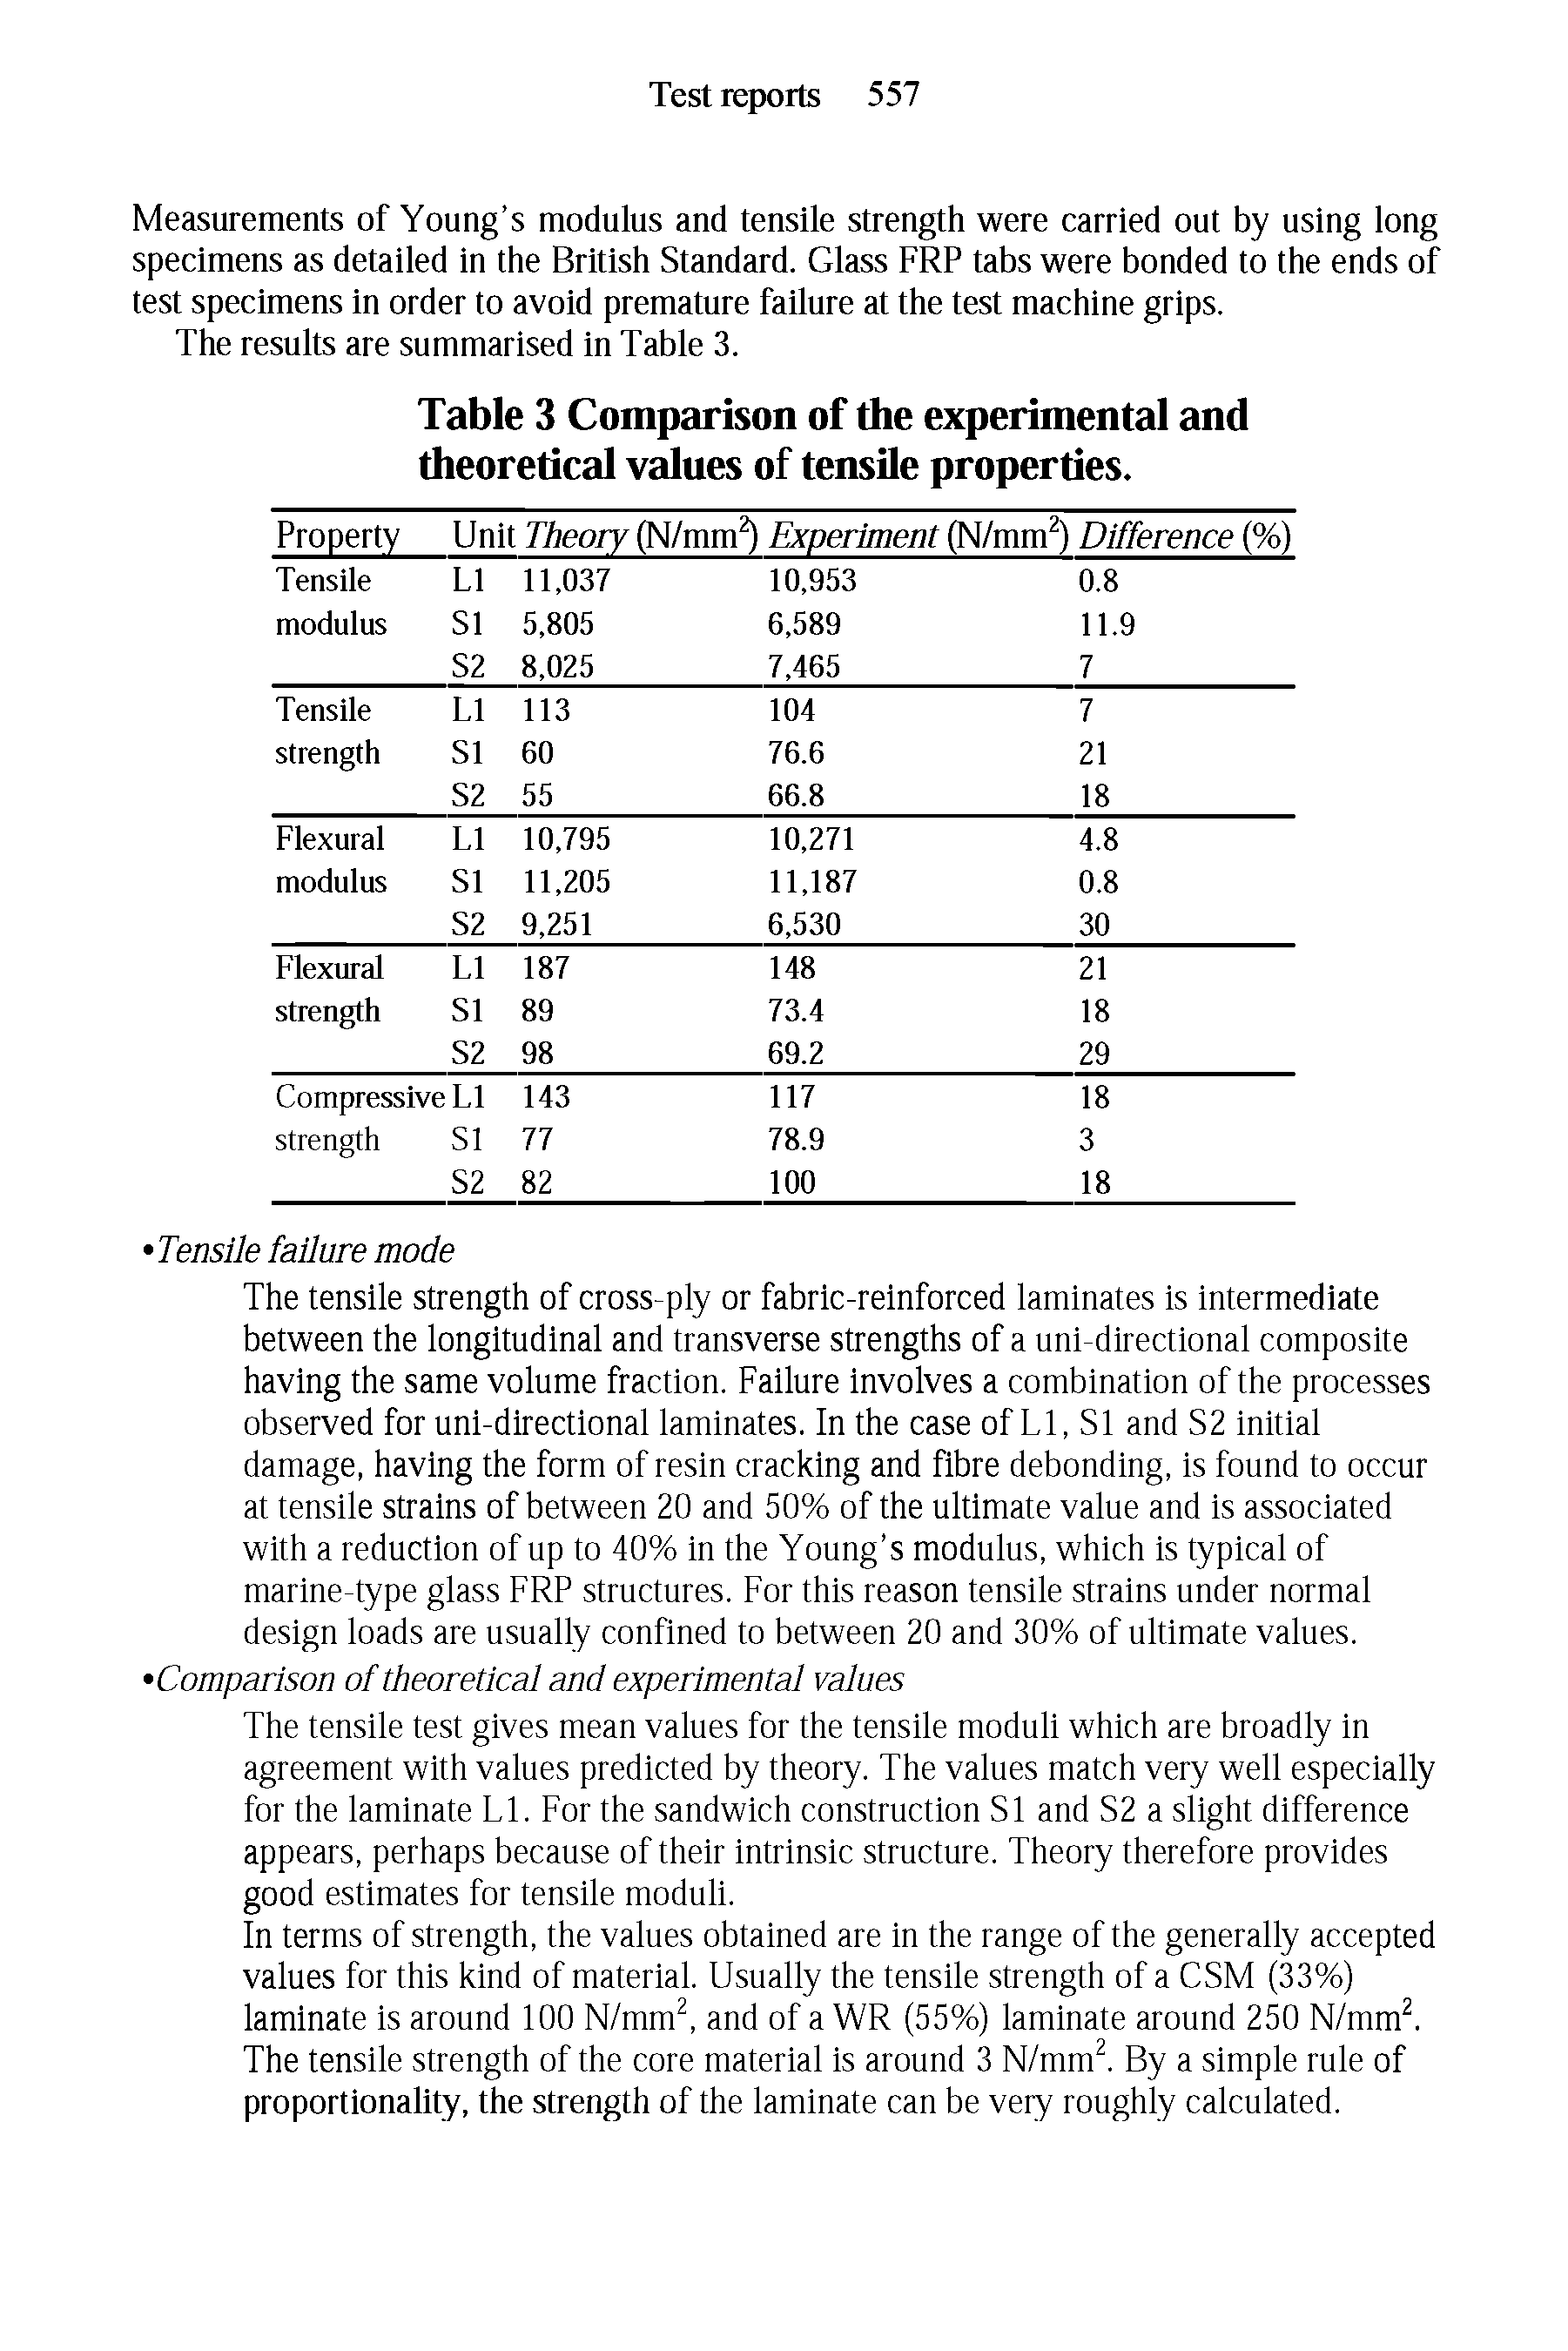 Table 3 Comparison of the experimental and theoretical values of tensile properties.